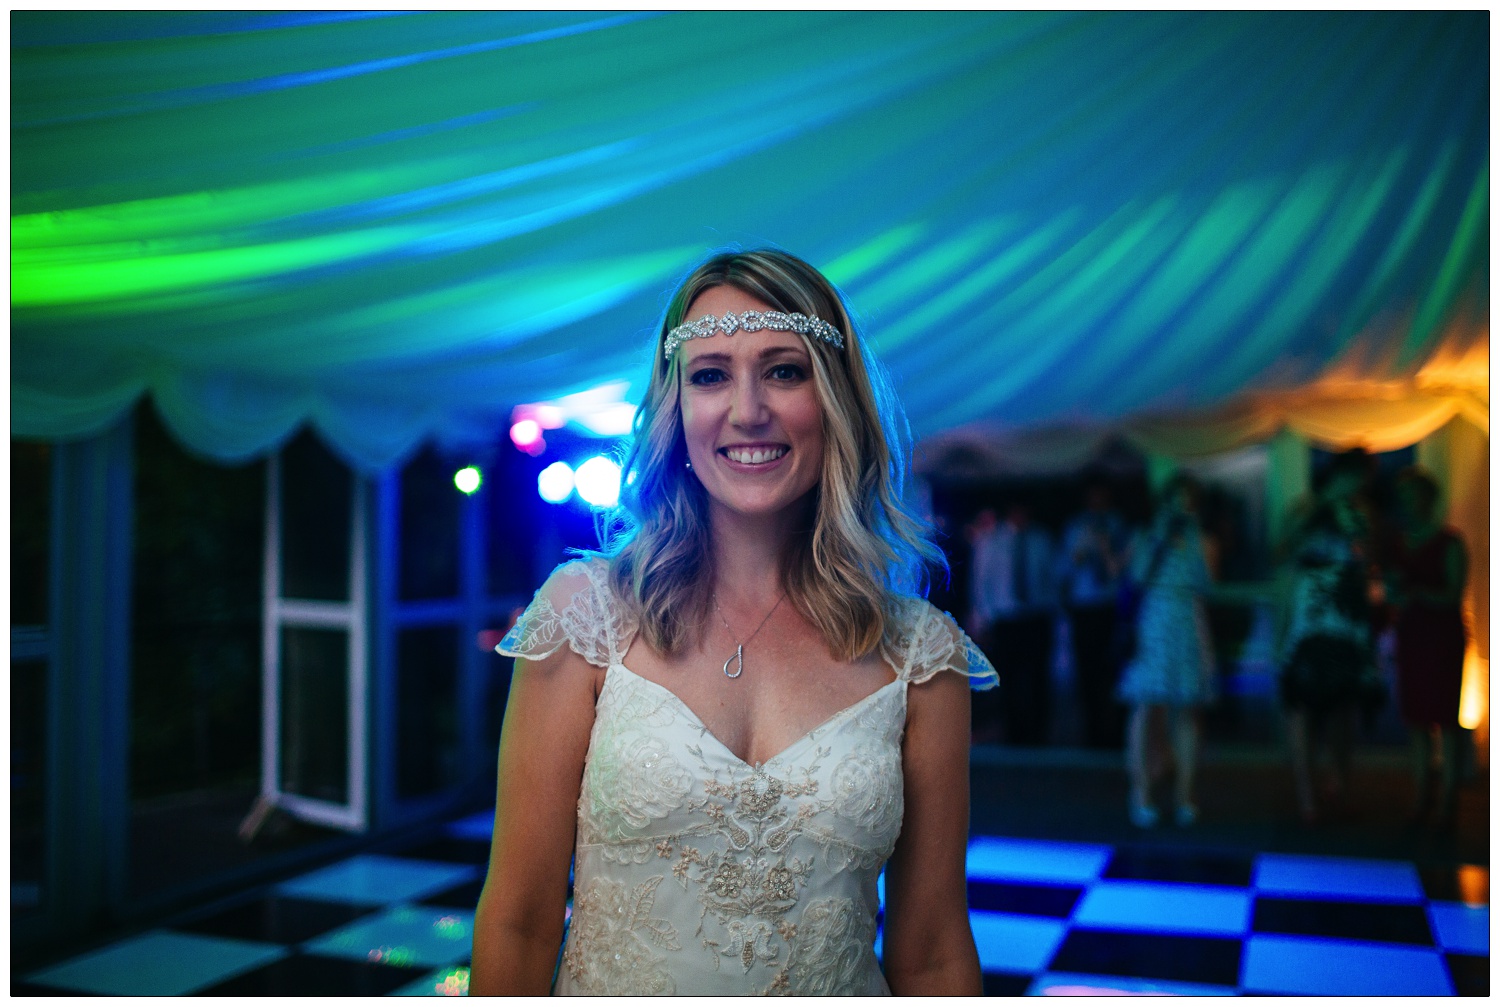 The bride is smiling at the camera. The dance floor is lit up blue.